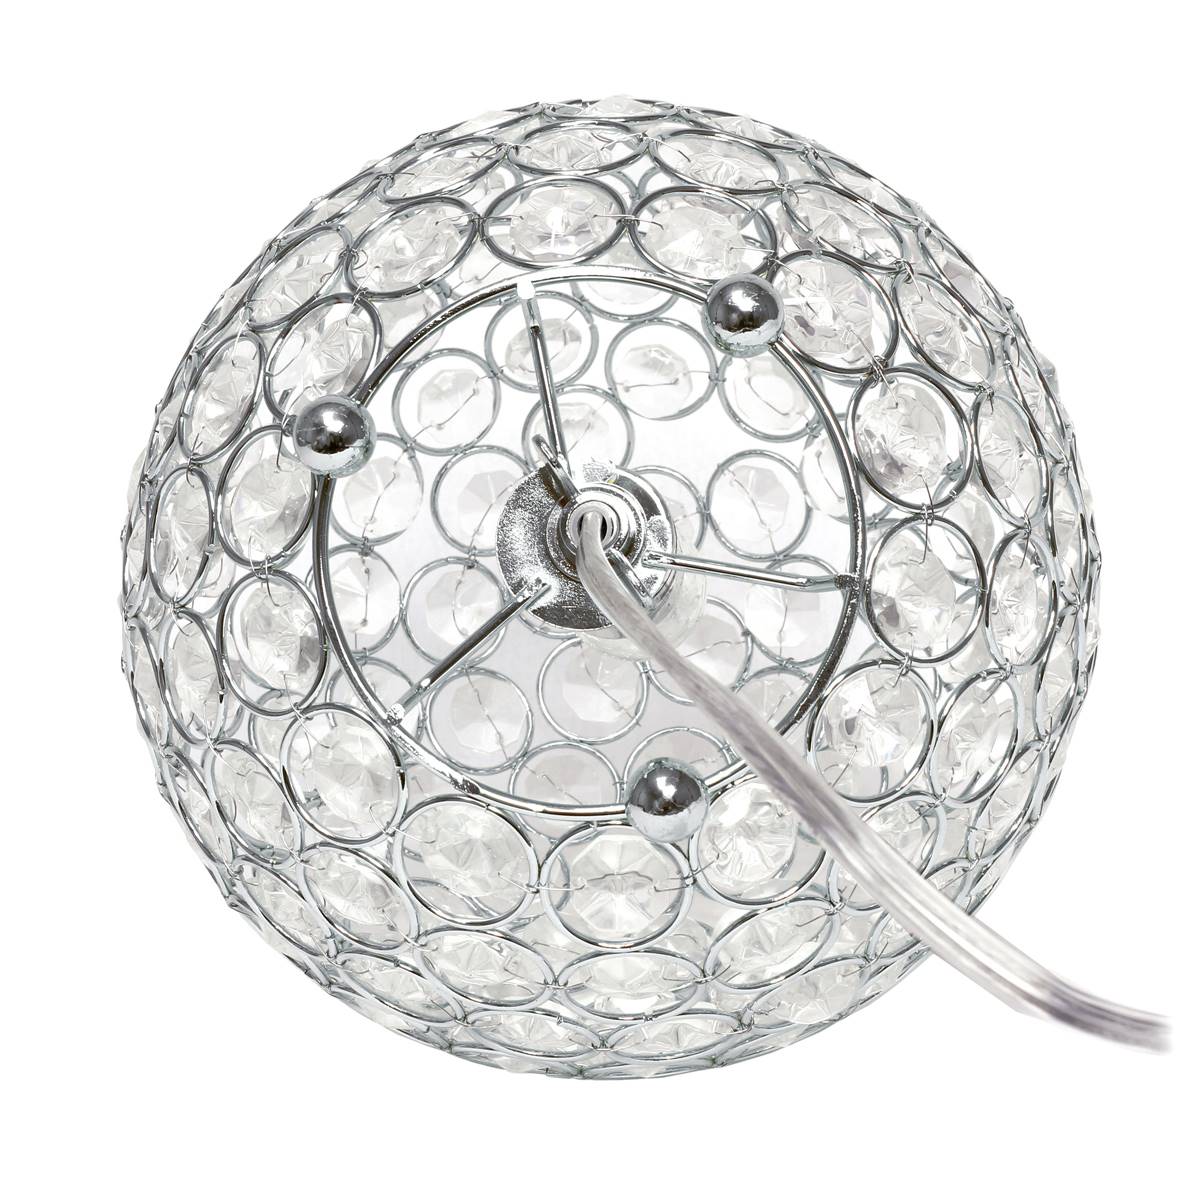 Lalia Home Elipse Medium 8in. Metal Crystal Round Orb Table Lamp